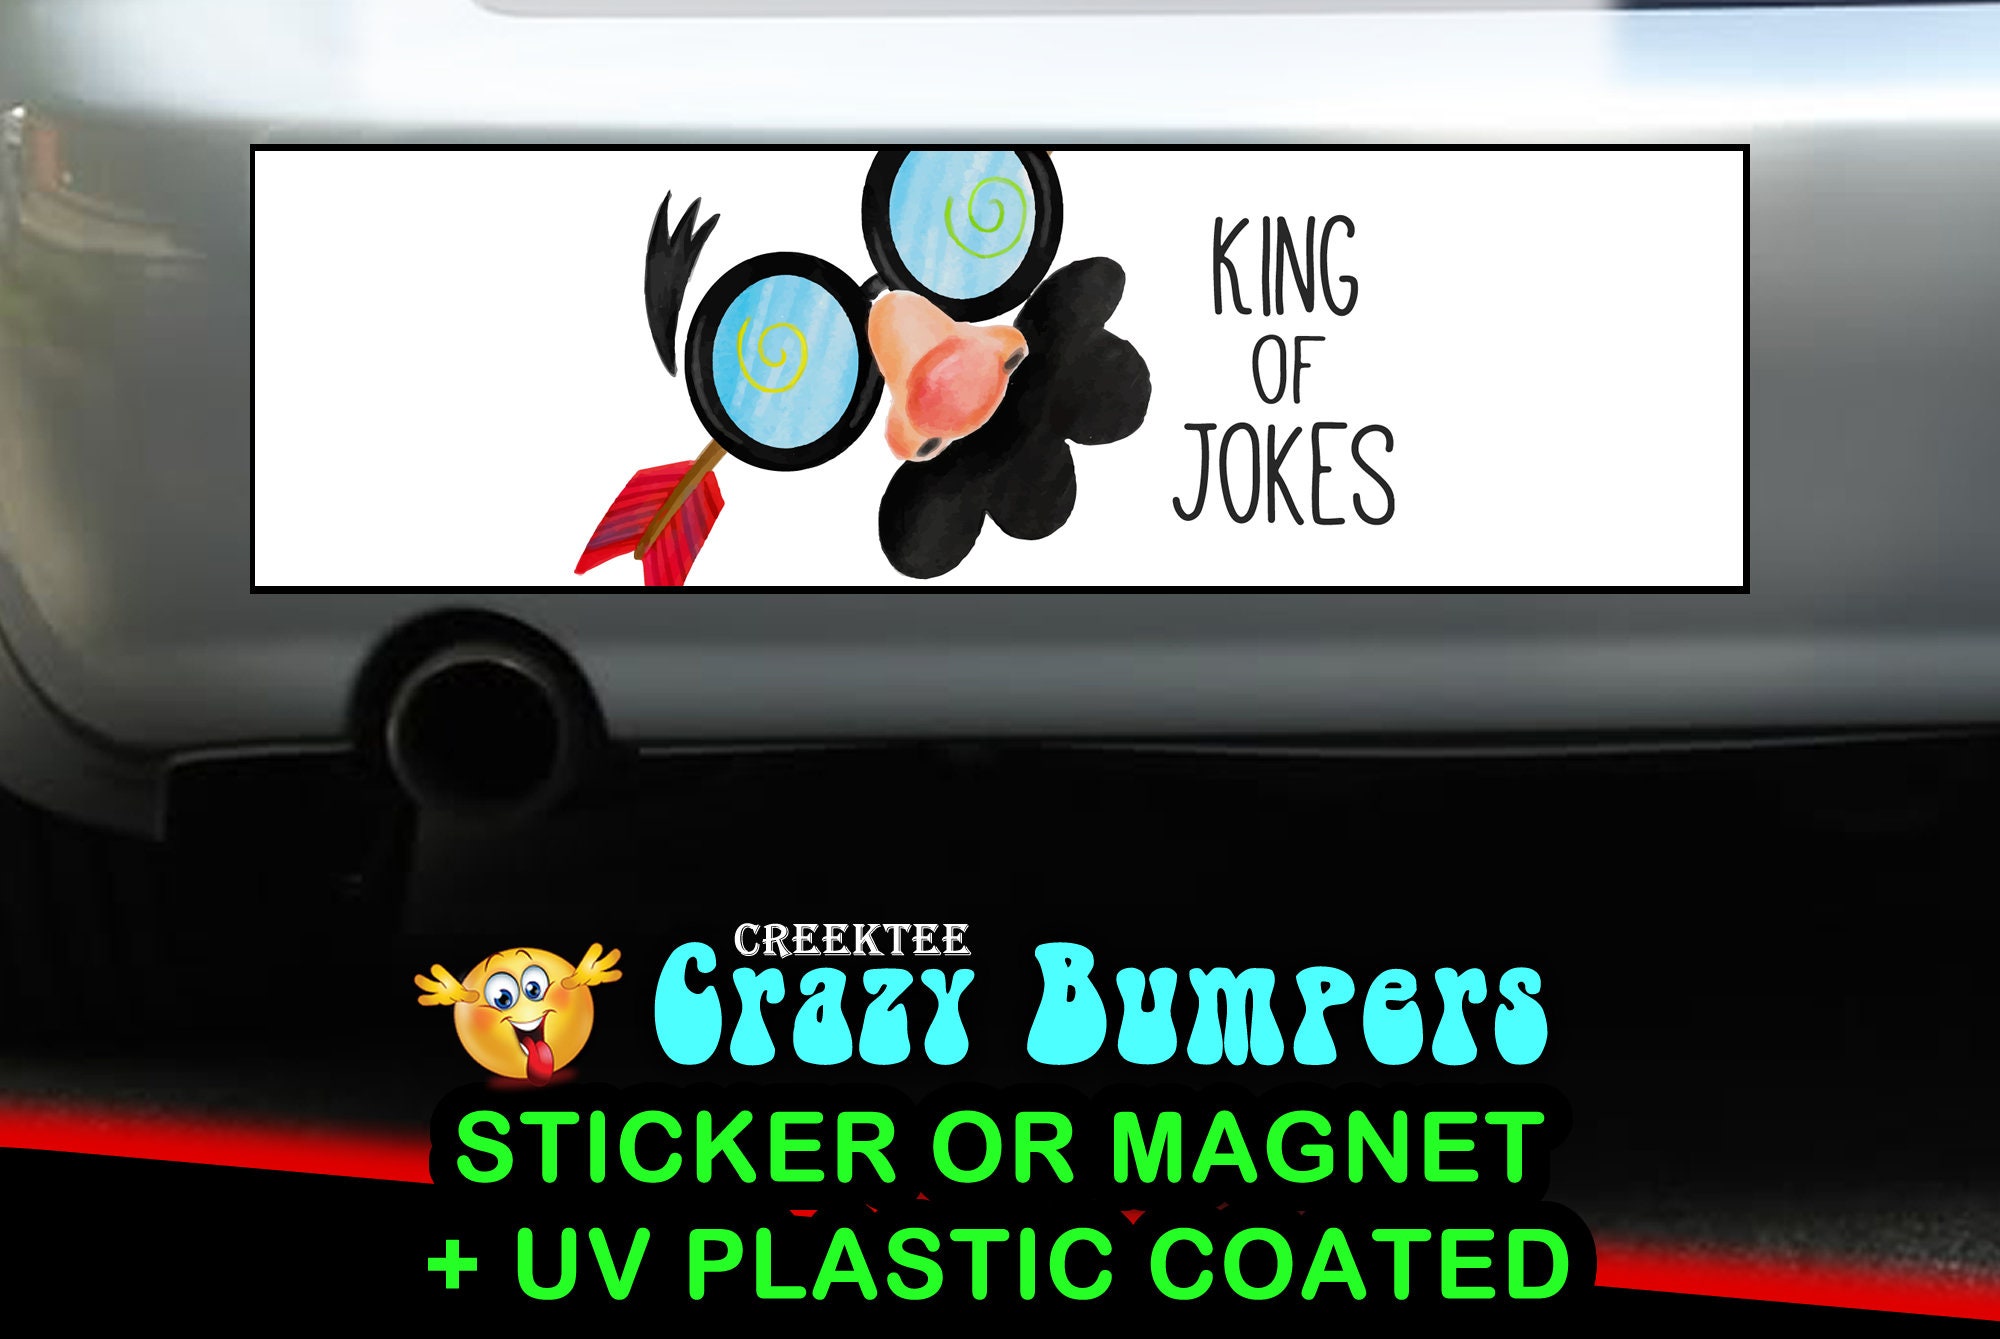 King Of Jokes bumper sticker or magnet, 9 x 2.7 or 10 x 3 Sticker Magnet or bumper sticker or bumper magnet